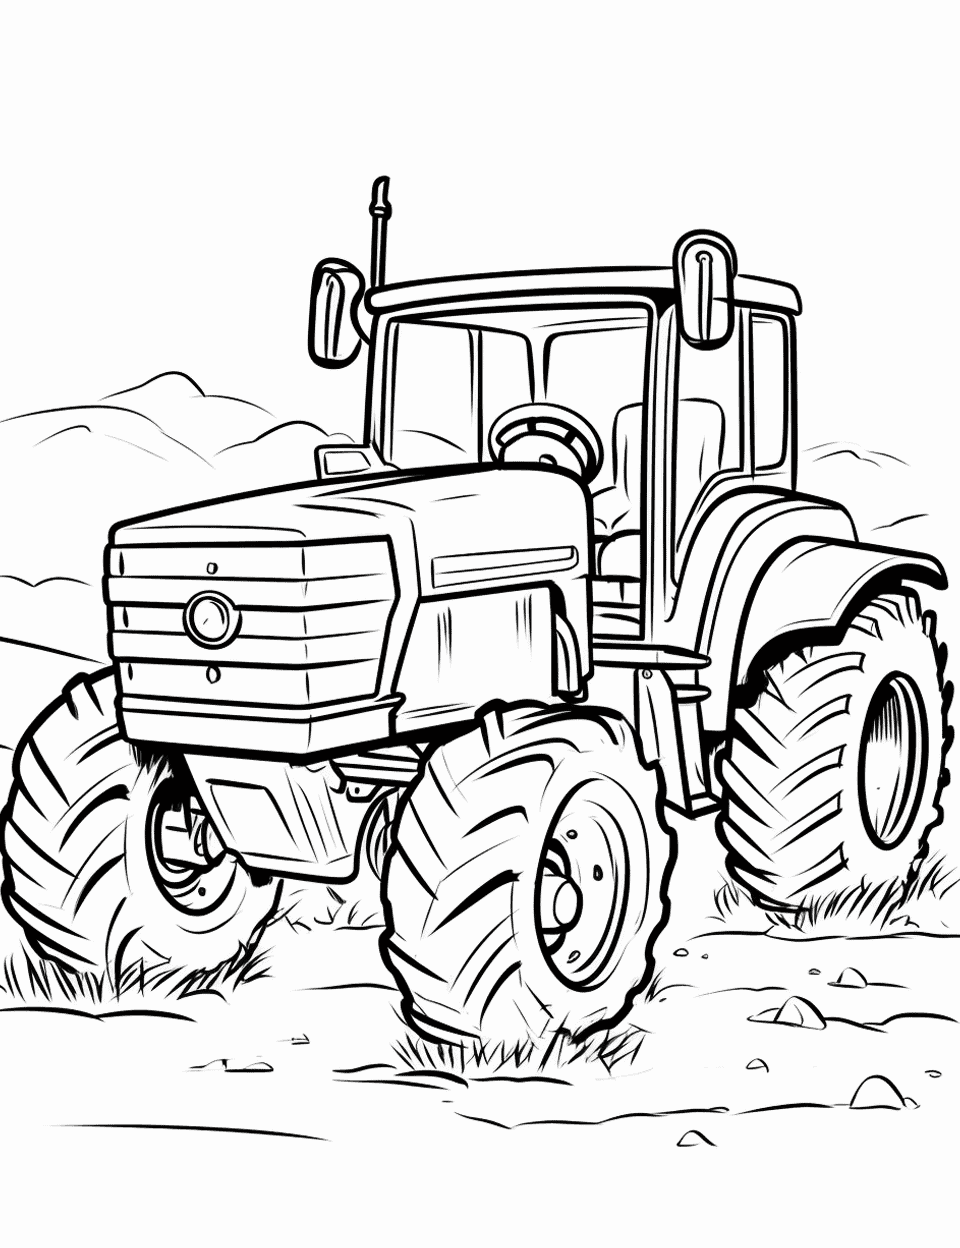 Working Tractor in the Mud Coloring Page - A robust tractor actively working, its wheels caked with mud.